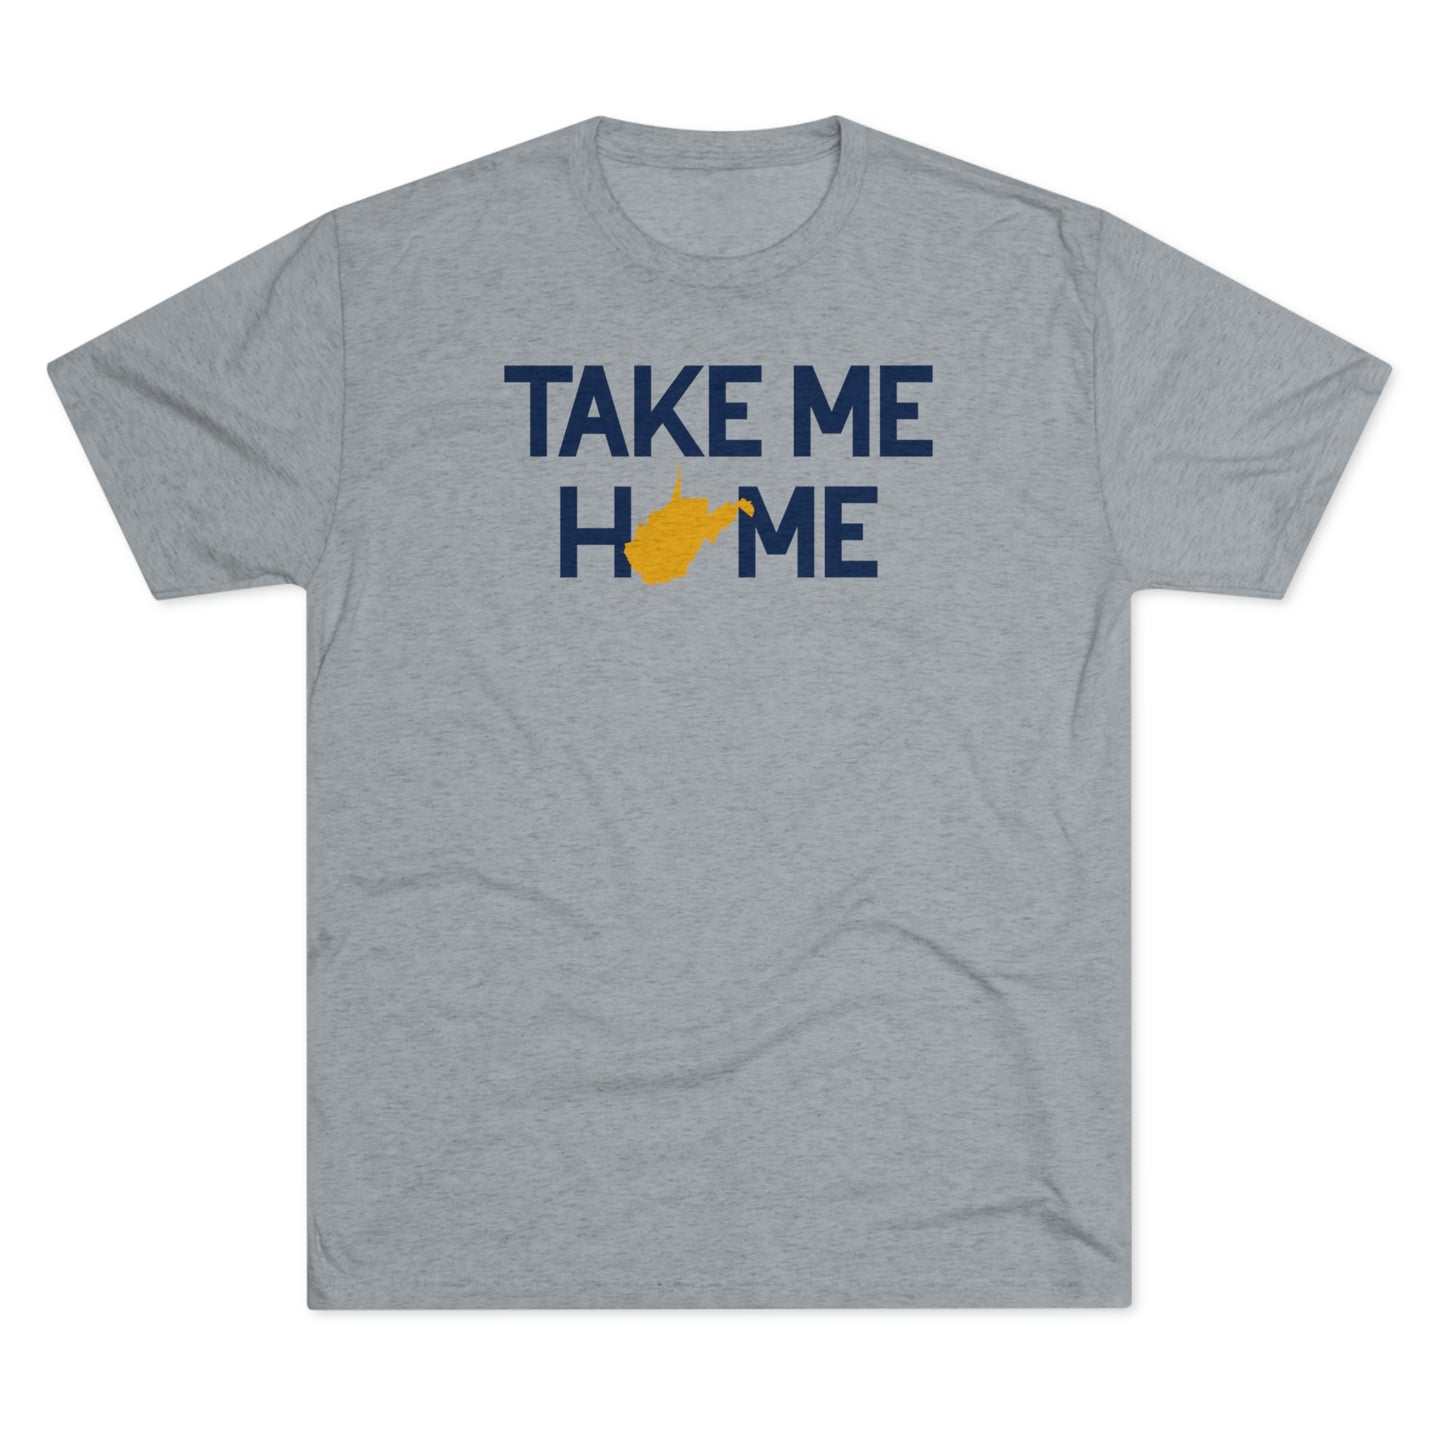 TAKE ME HOME_WV STATE SHAPE SUBSTITUTION-Unisex Tri-Blend Crew Tee